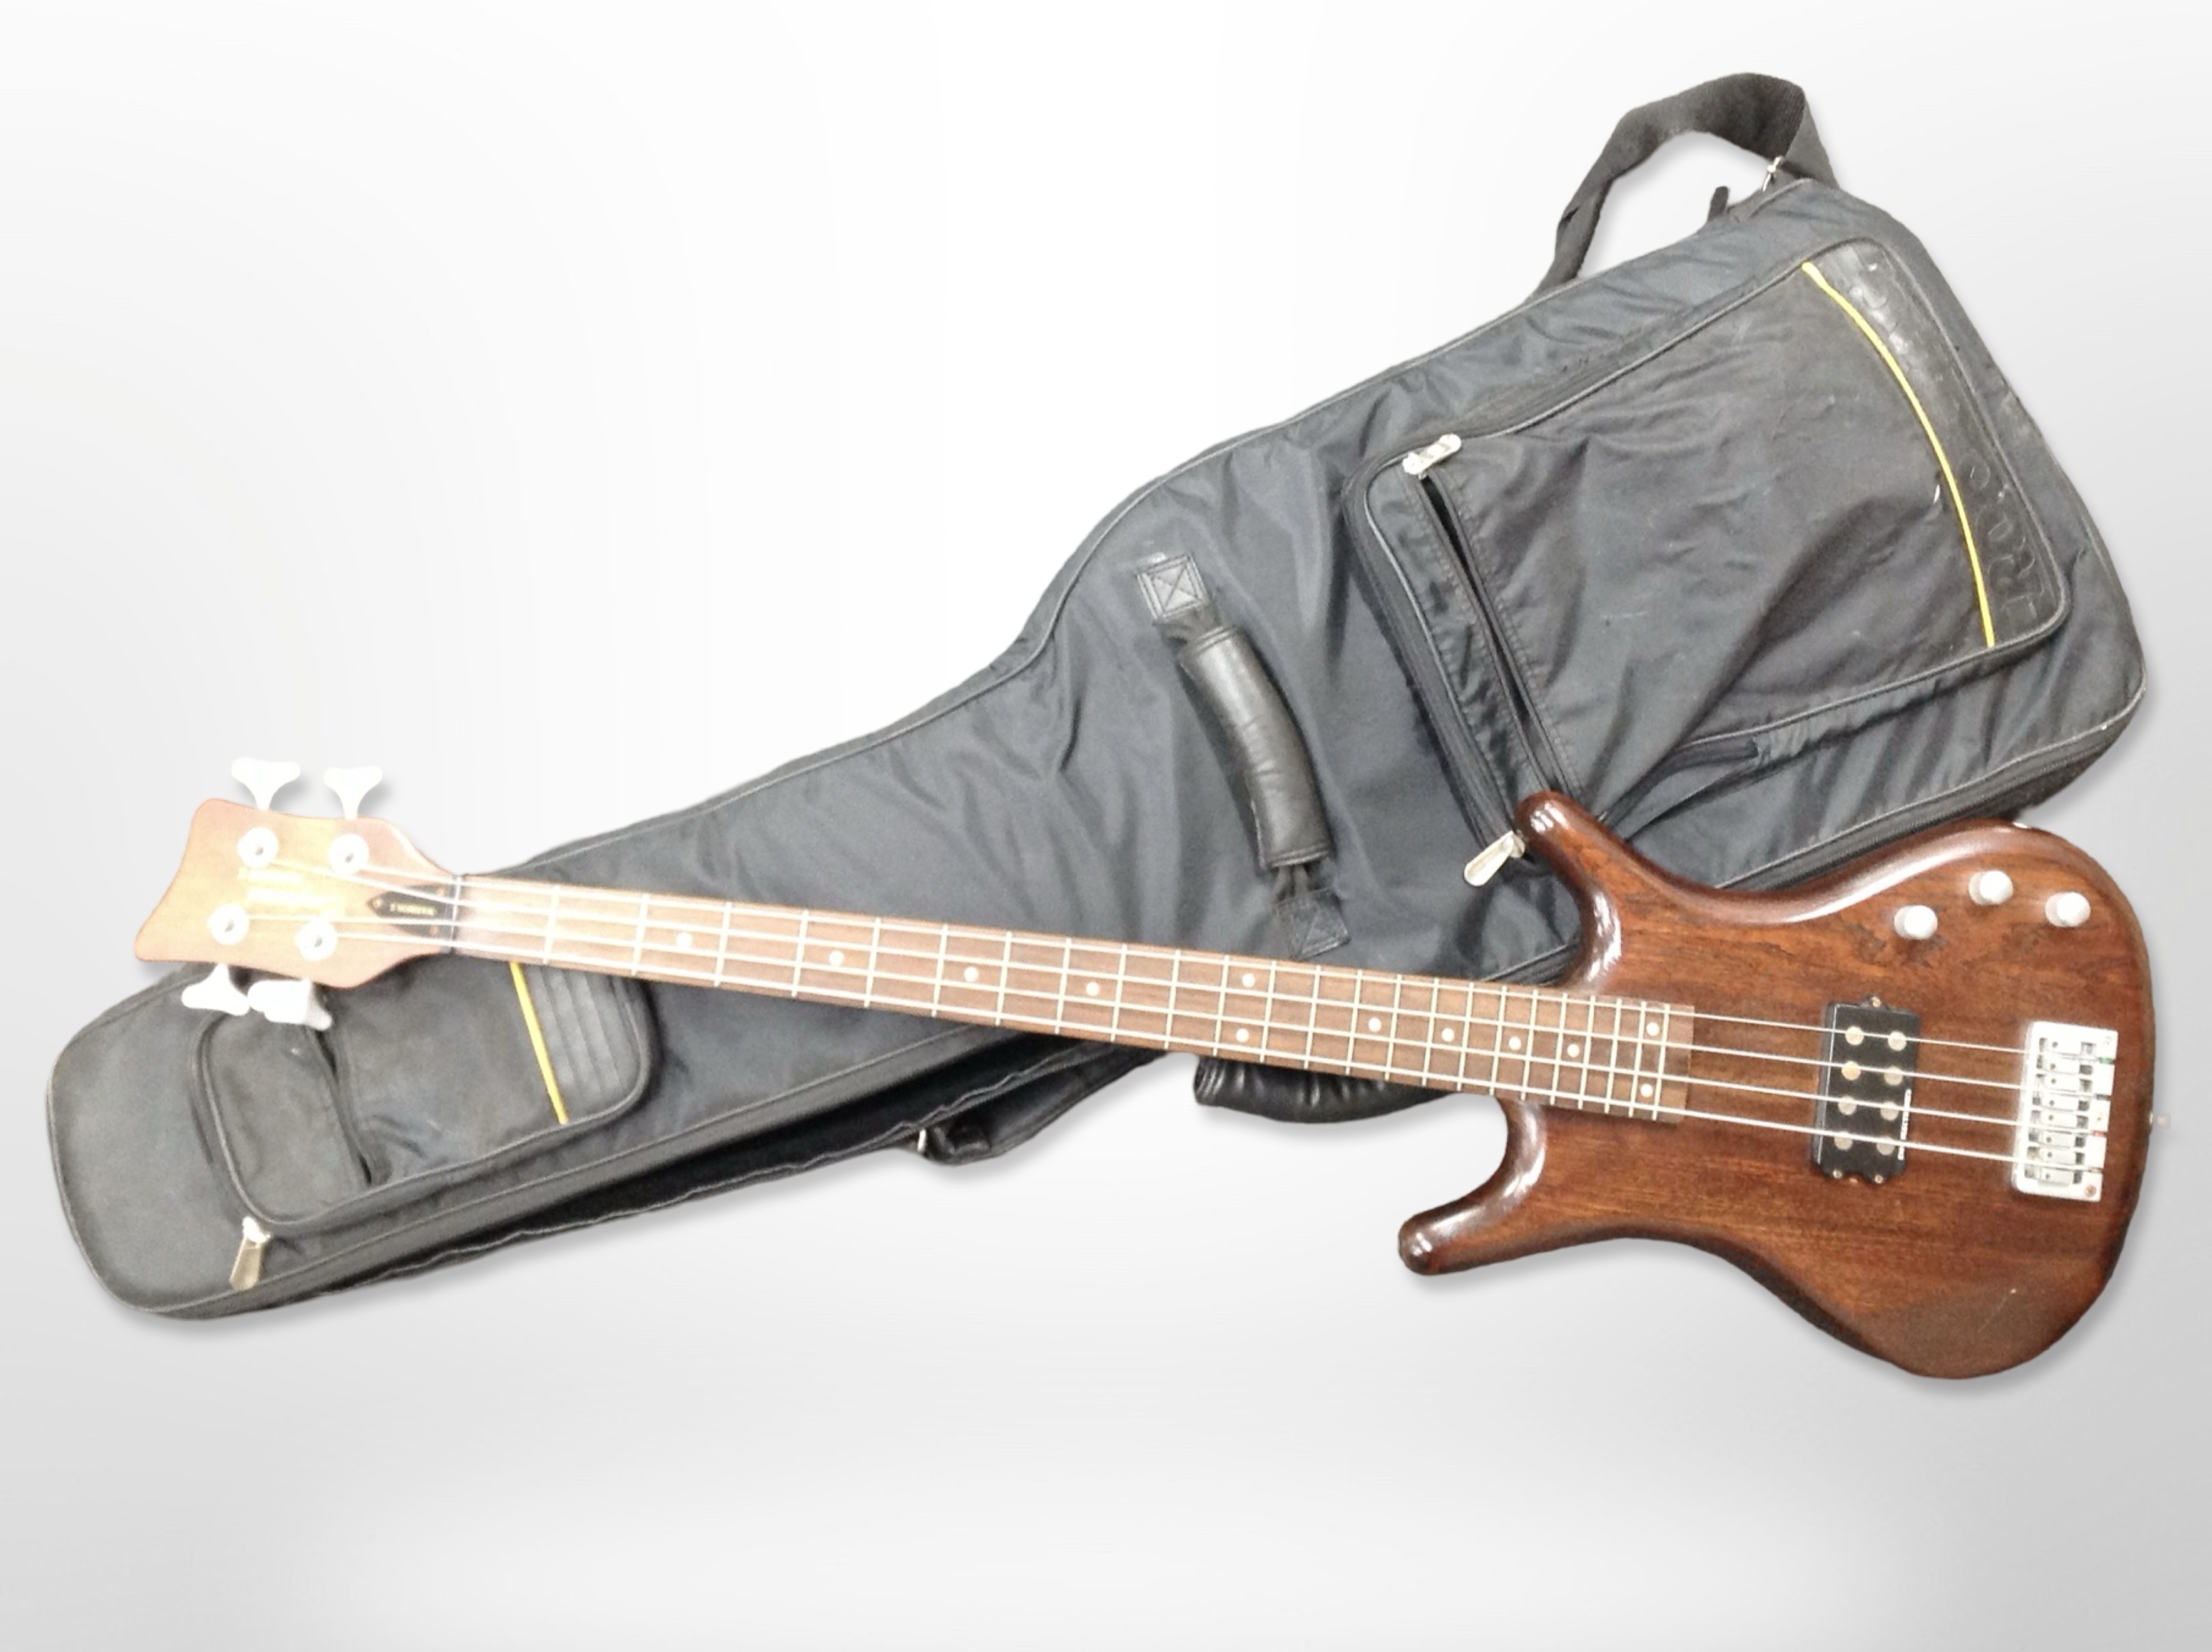 A Tanglewood Warrior II bass guitar with soft carry bag.